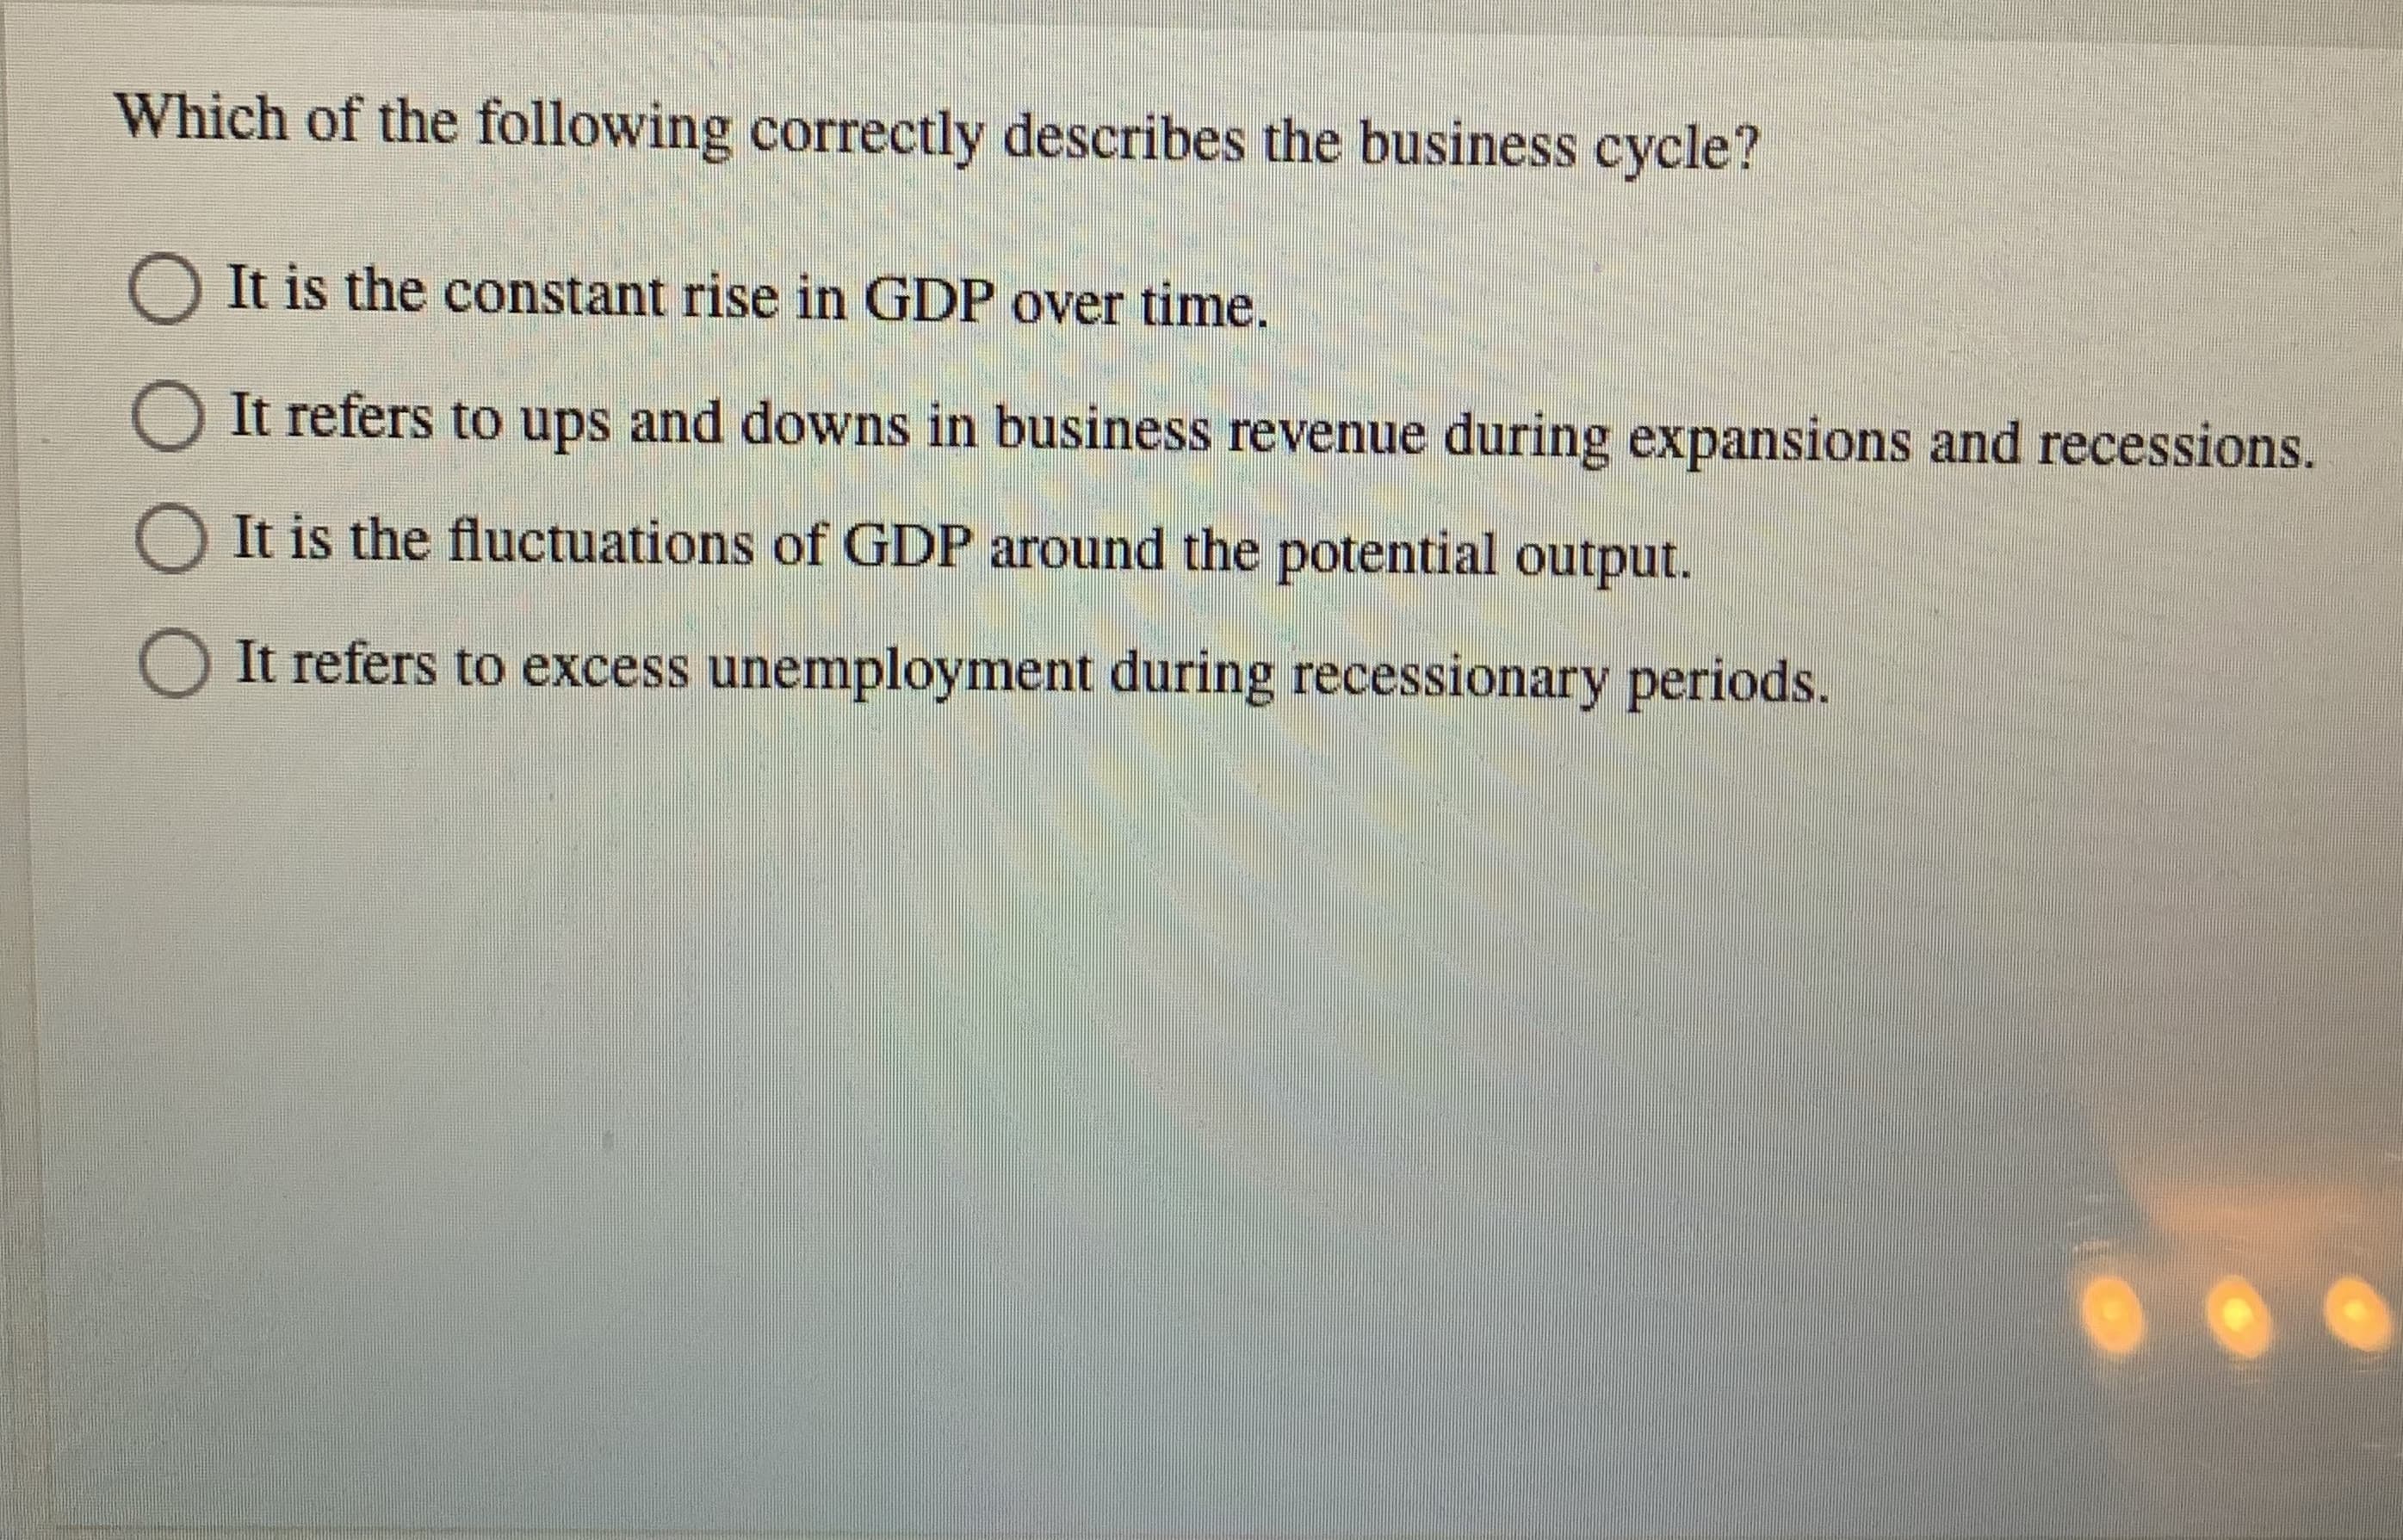 Which of the following correctly describes the business cycle?
O It is the constant rise in GDP over time.
It refers to ups and downs in business revenue during expansions and recessions.
It is the fluctuations of GDP around the potential output.
It refers to excess unemployment during recessionary periods.
